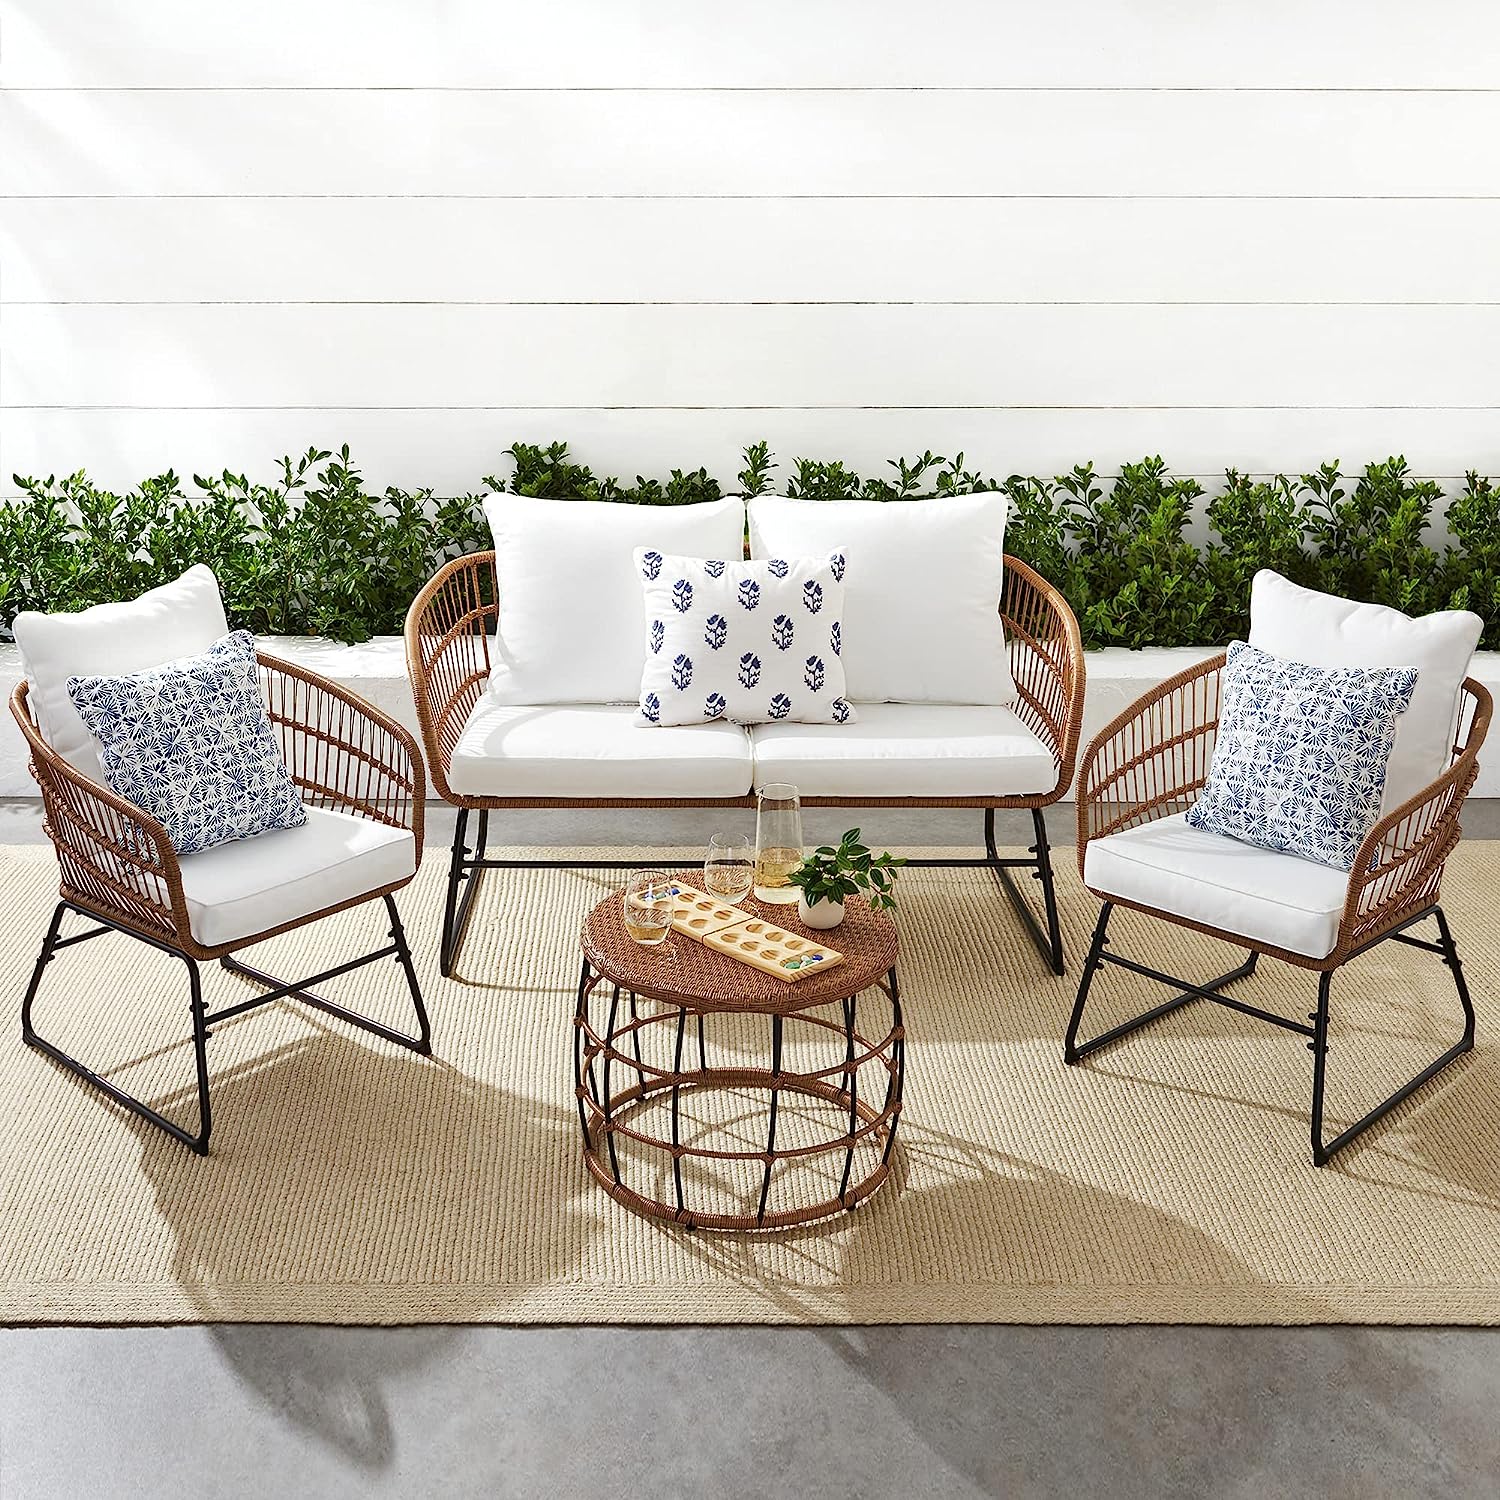 What Is The Best Material For Outdoor Furniture